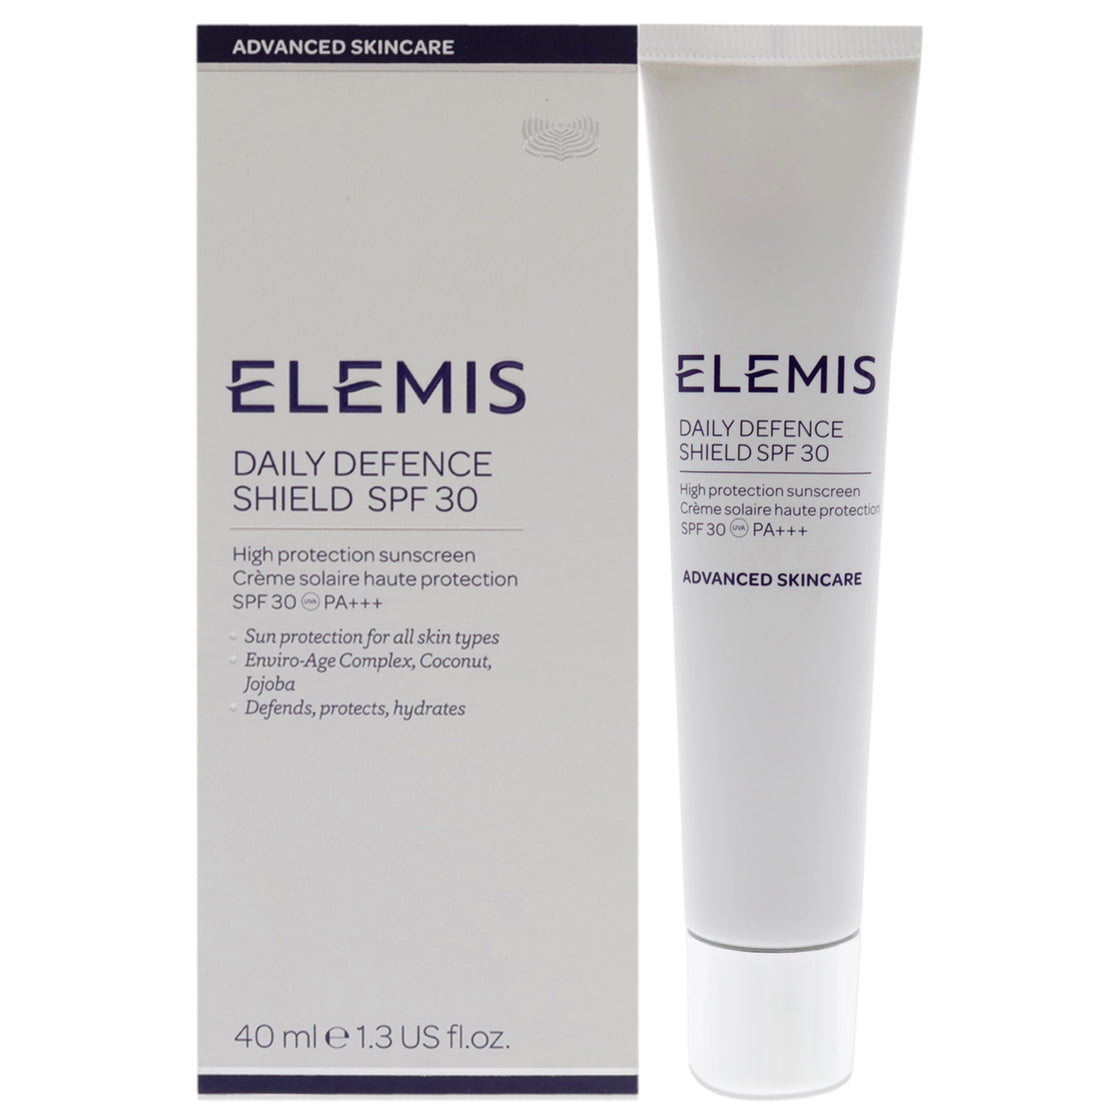 Daily Defence Shield SPF 30 by Elemis for Unisex - 1.3 oz Sunscreen